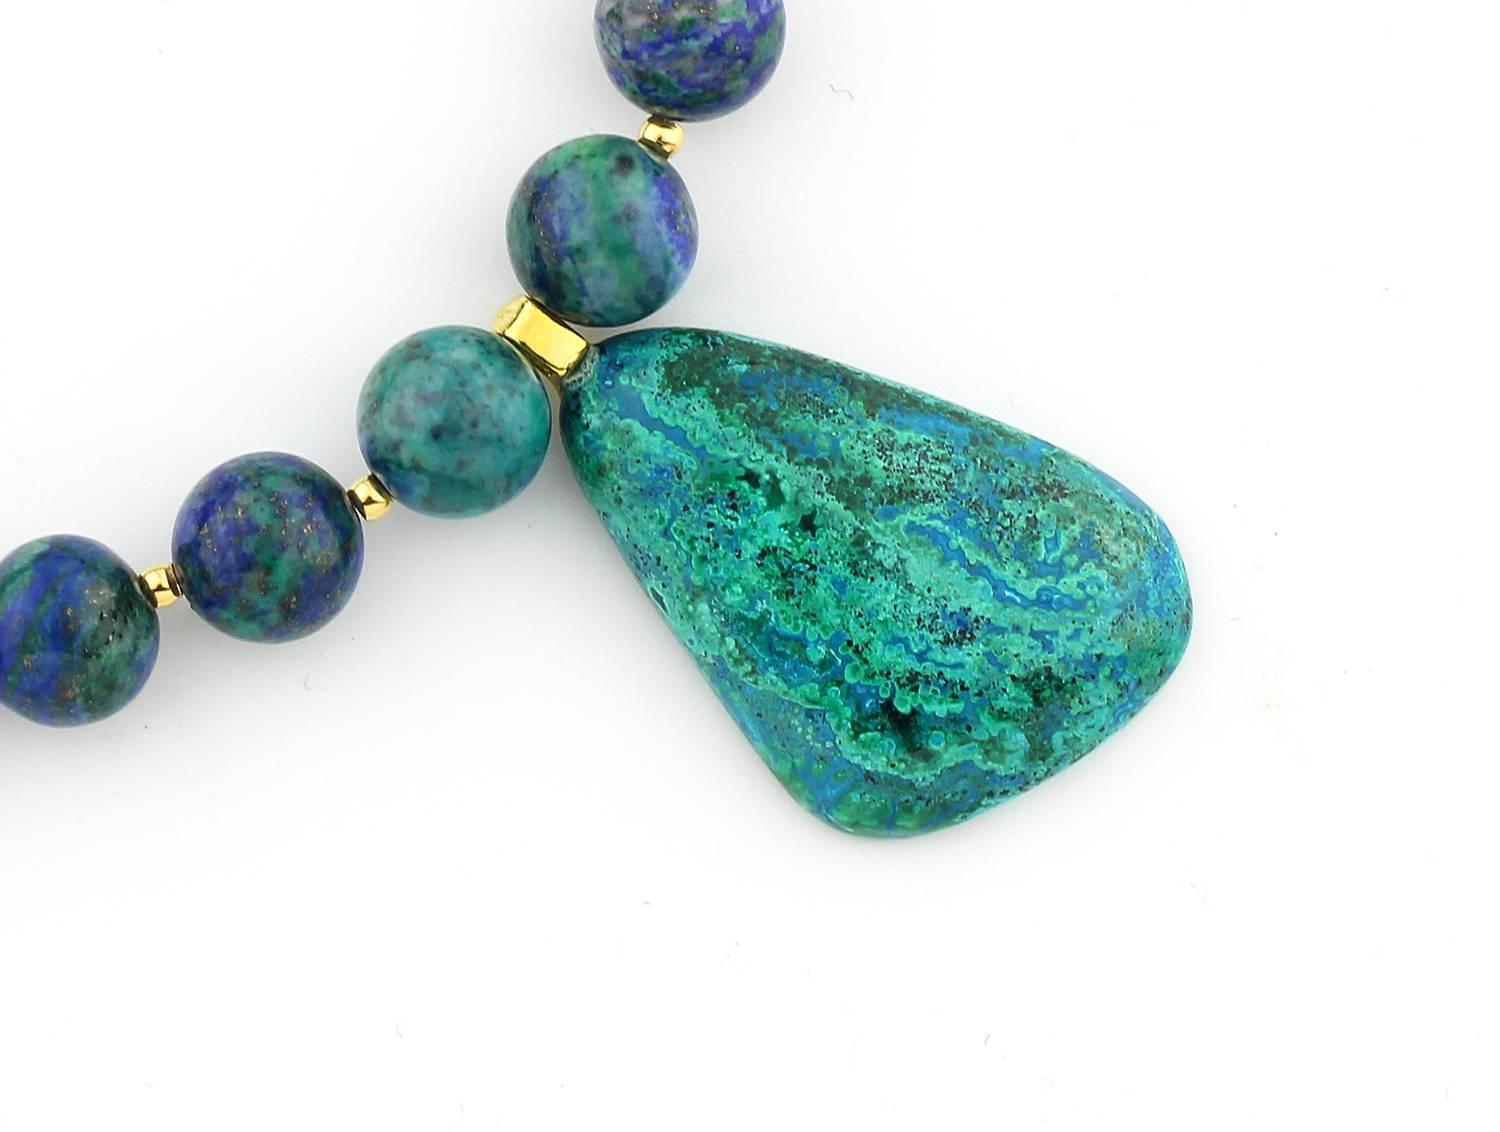 Rare and very unusual blue and green Azurite (also sometimes called Chessylite from a region in France) adorned with a blue/green Chrysocolla 